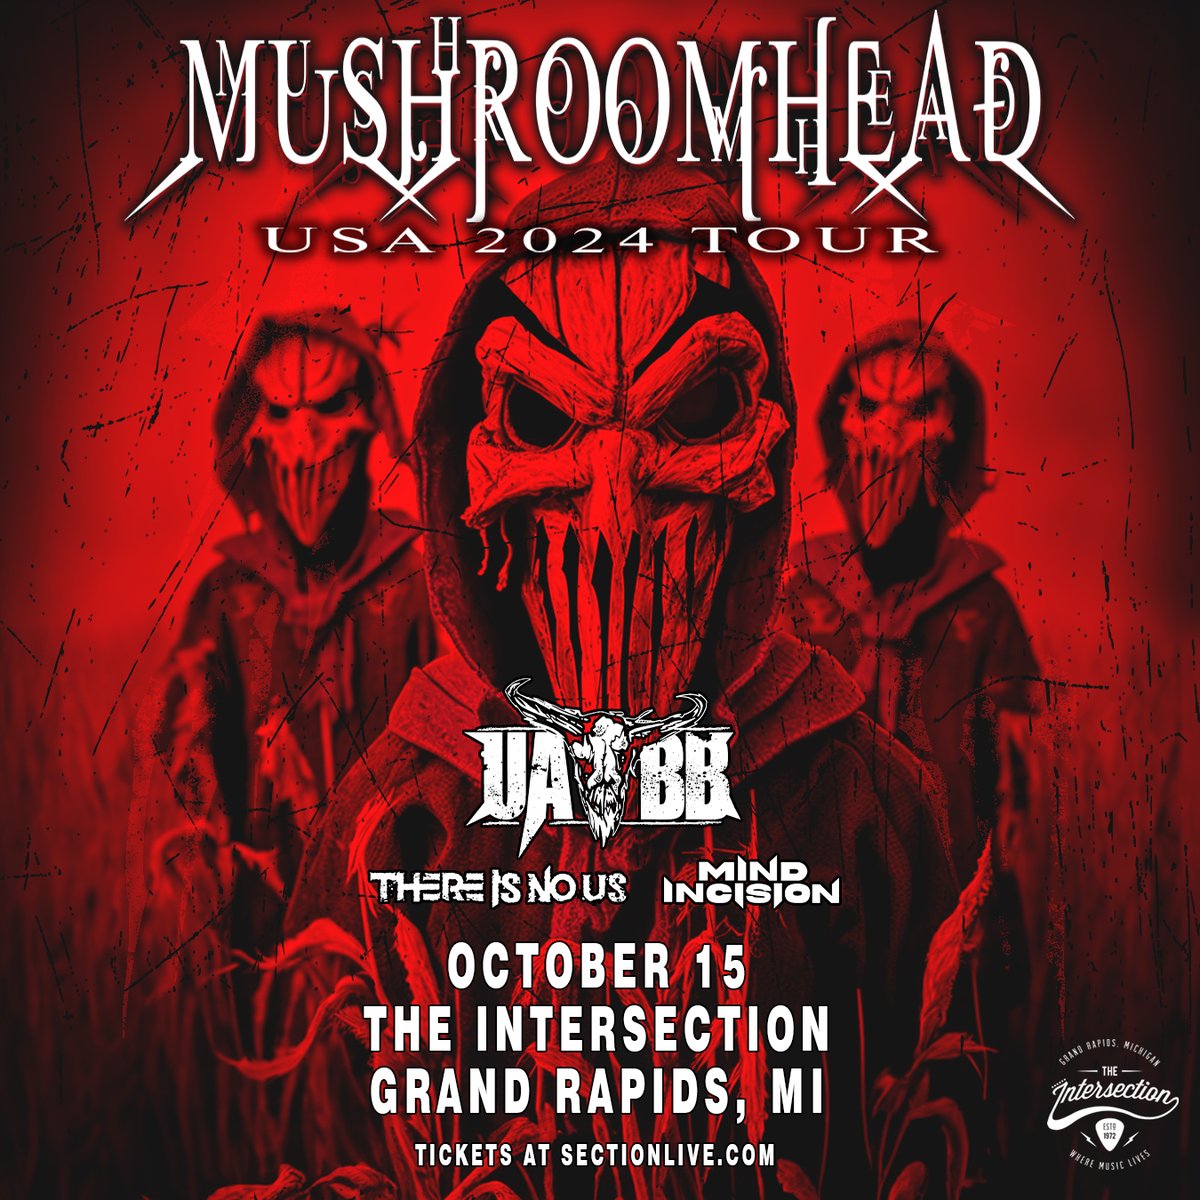 New Show - @mushroomhead USA 2024 Tour with @UABB @ThereIsNoUsband @MindIncision at The Intersection on 10/15 Venue presale 5/1 12pm On sale 5/3 10am Tickets at sectionlive.com